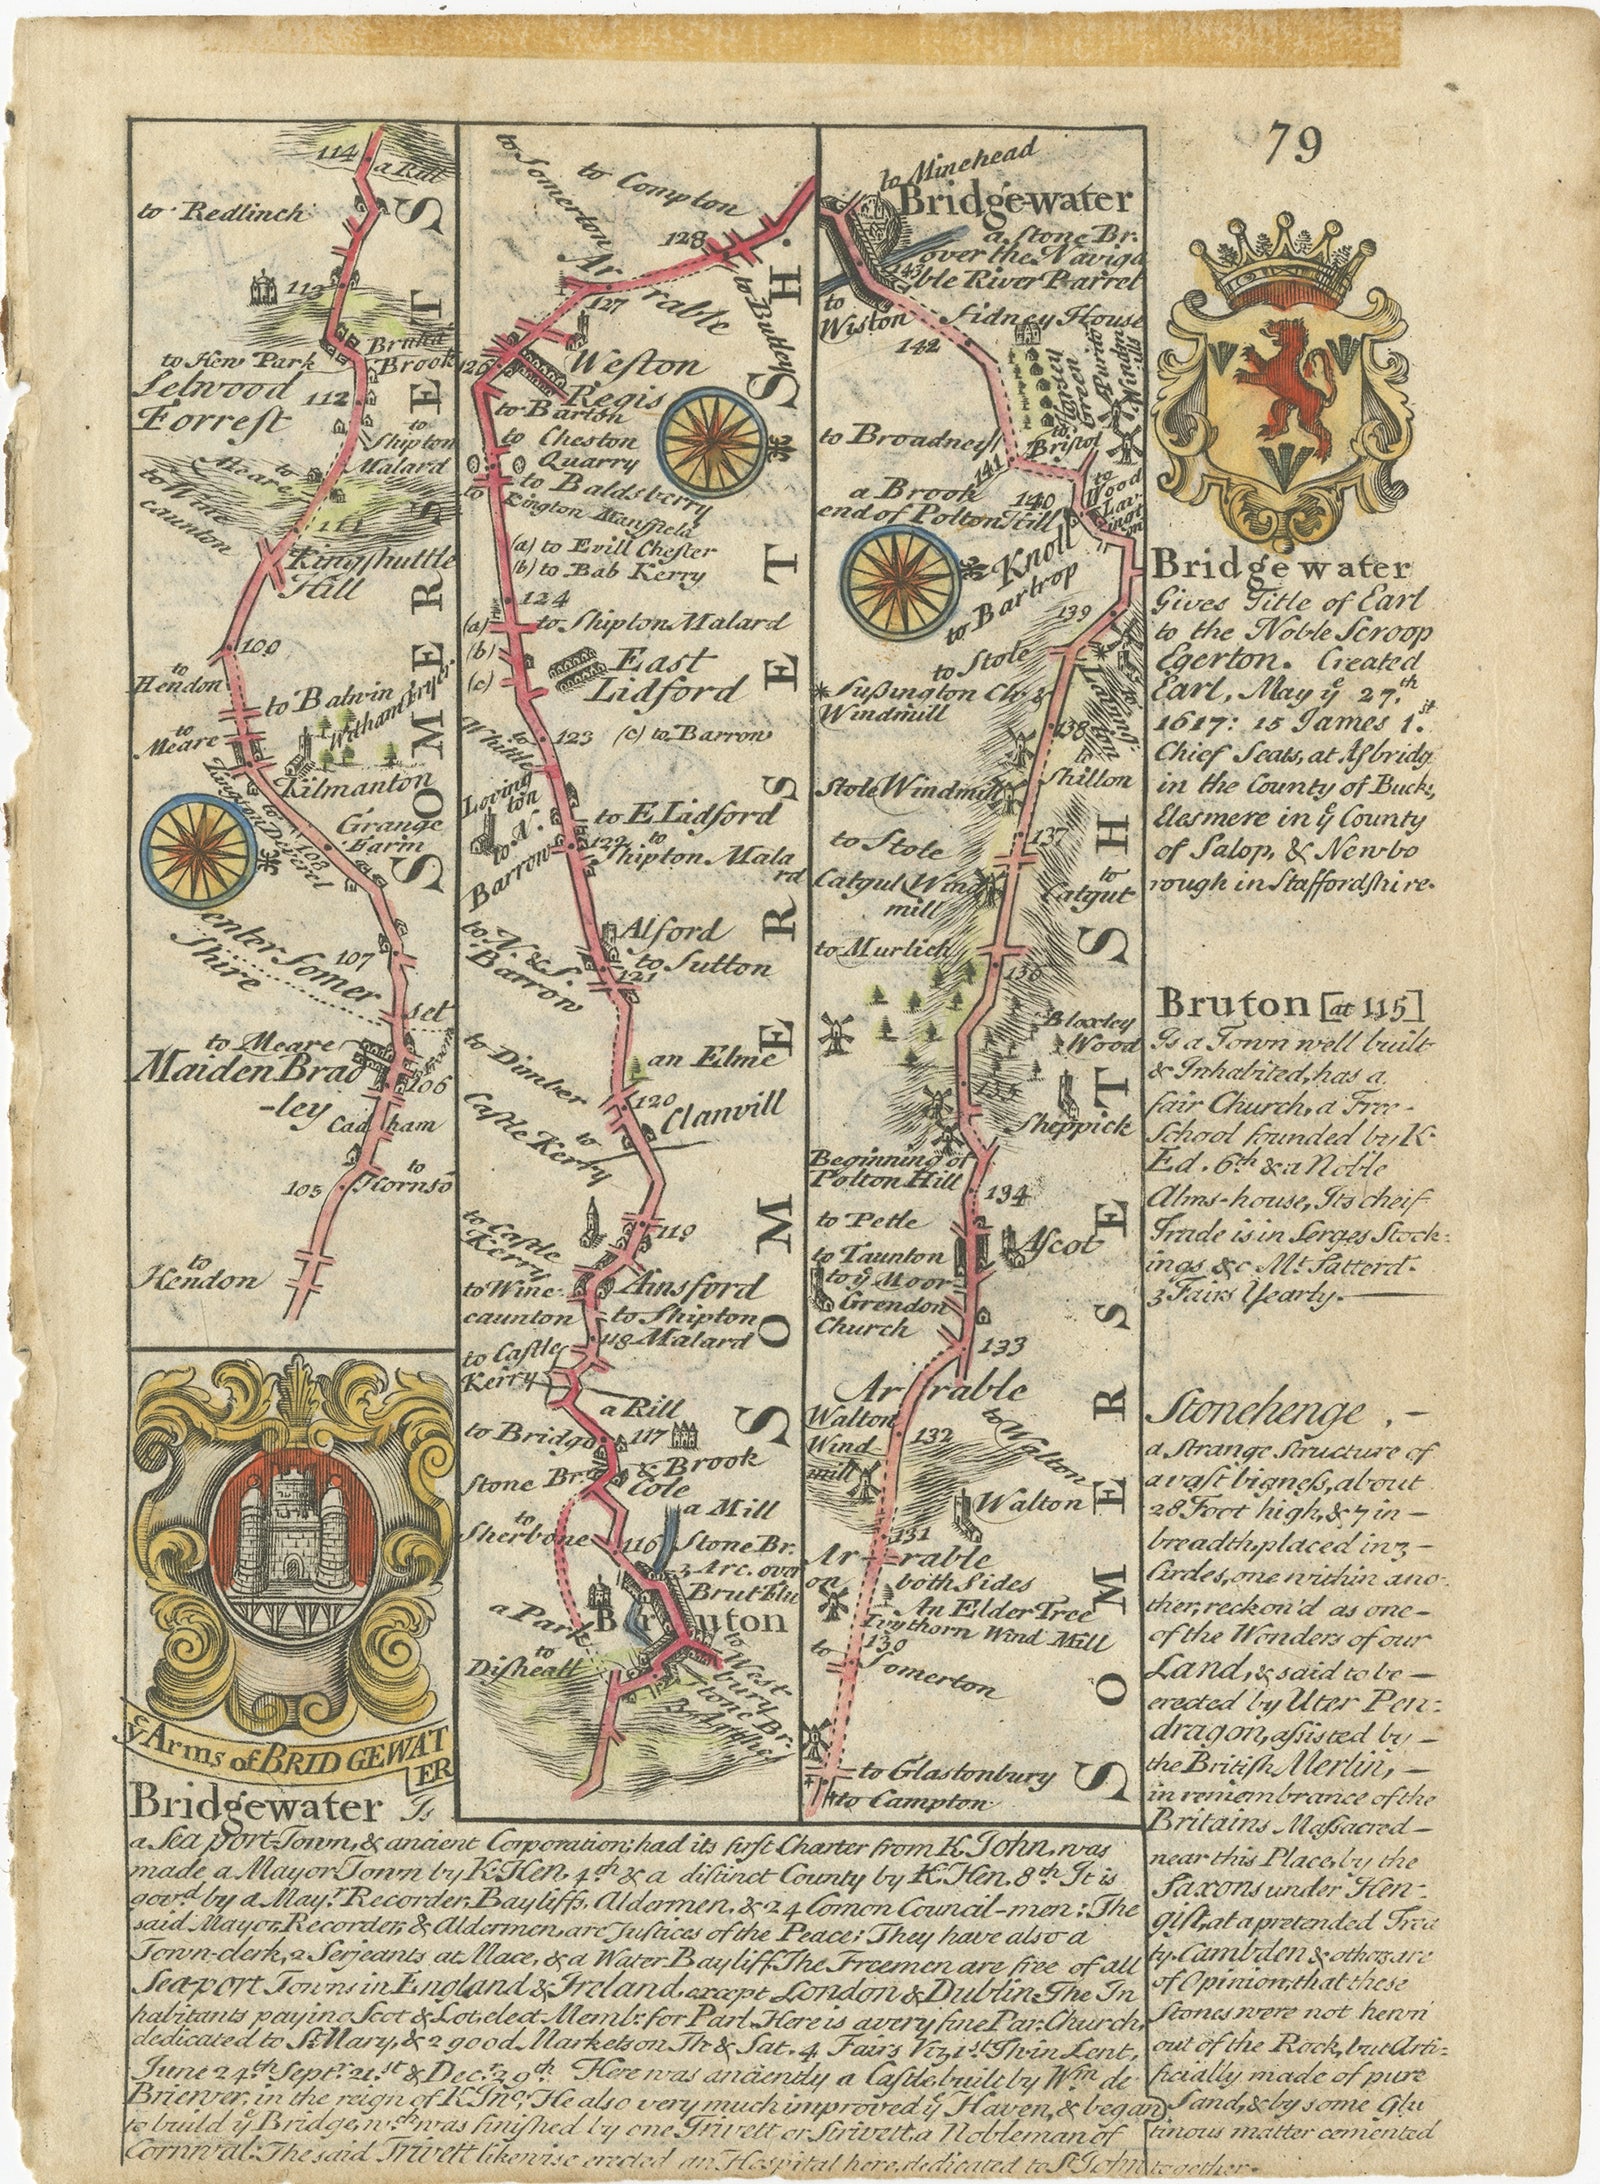 Antique map titled 'Bridgewater, Bruton'. 

Double sided road strip map showing the route from Maiden Bridge to Dulverton, via Bruton, Weston Regis, Bridgewater and Dulverton. This map originates from 'Britannia Depicta or Ogilby Improv'd' by J.